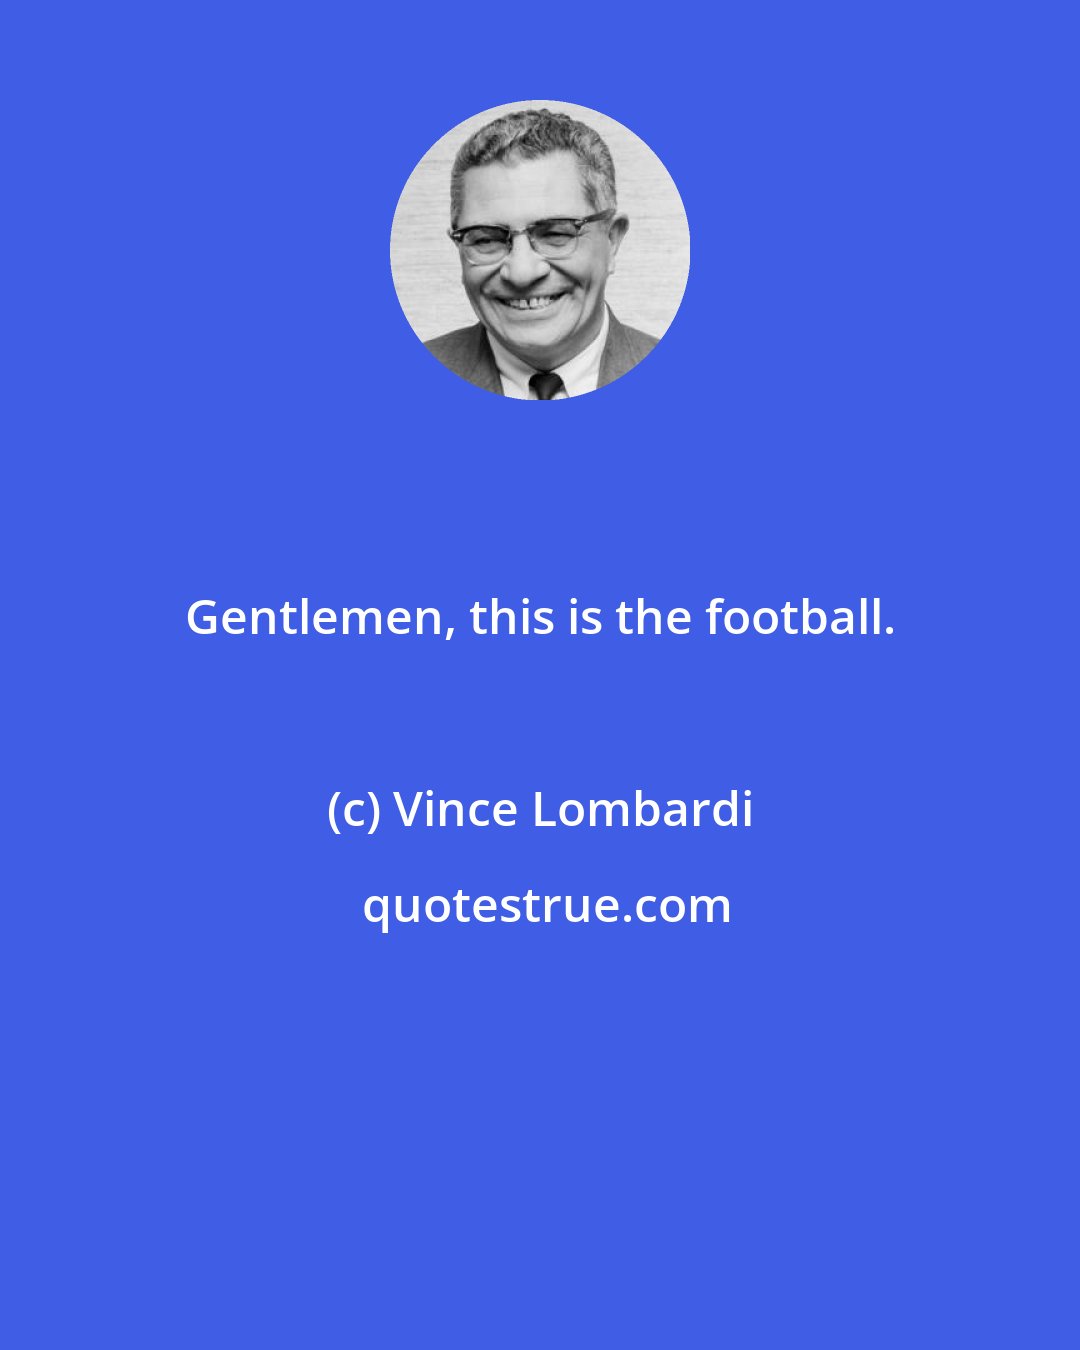 Vince Lombardi: Gentlemen, this is the football.